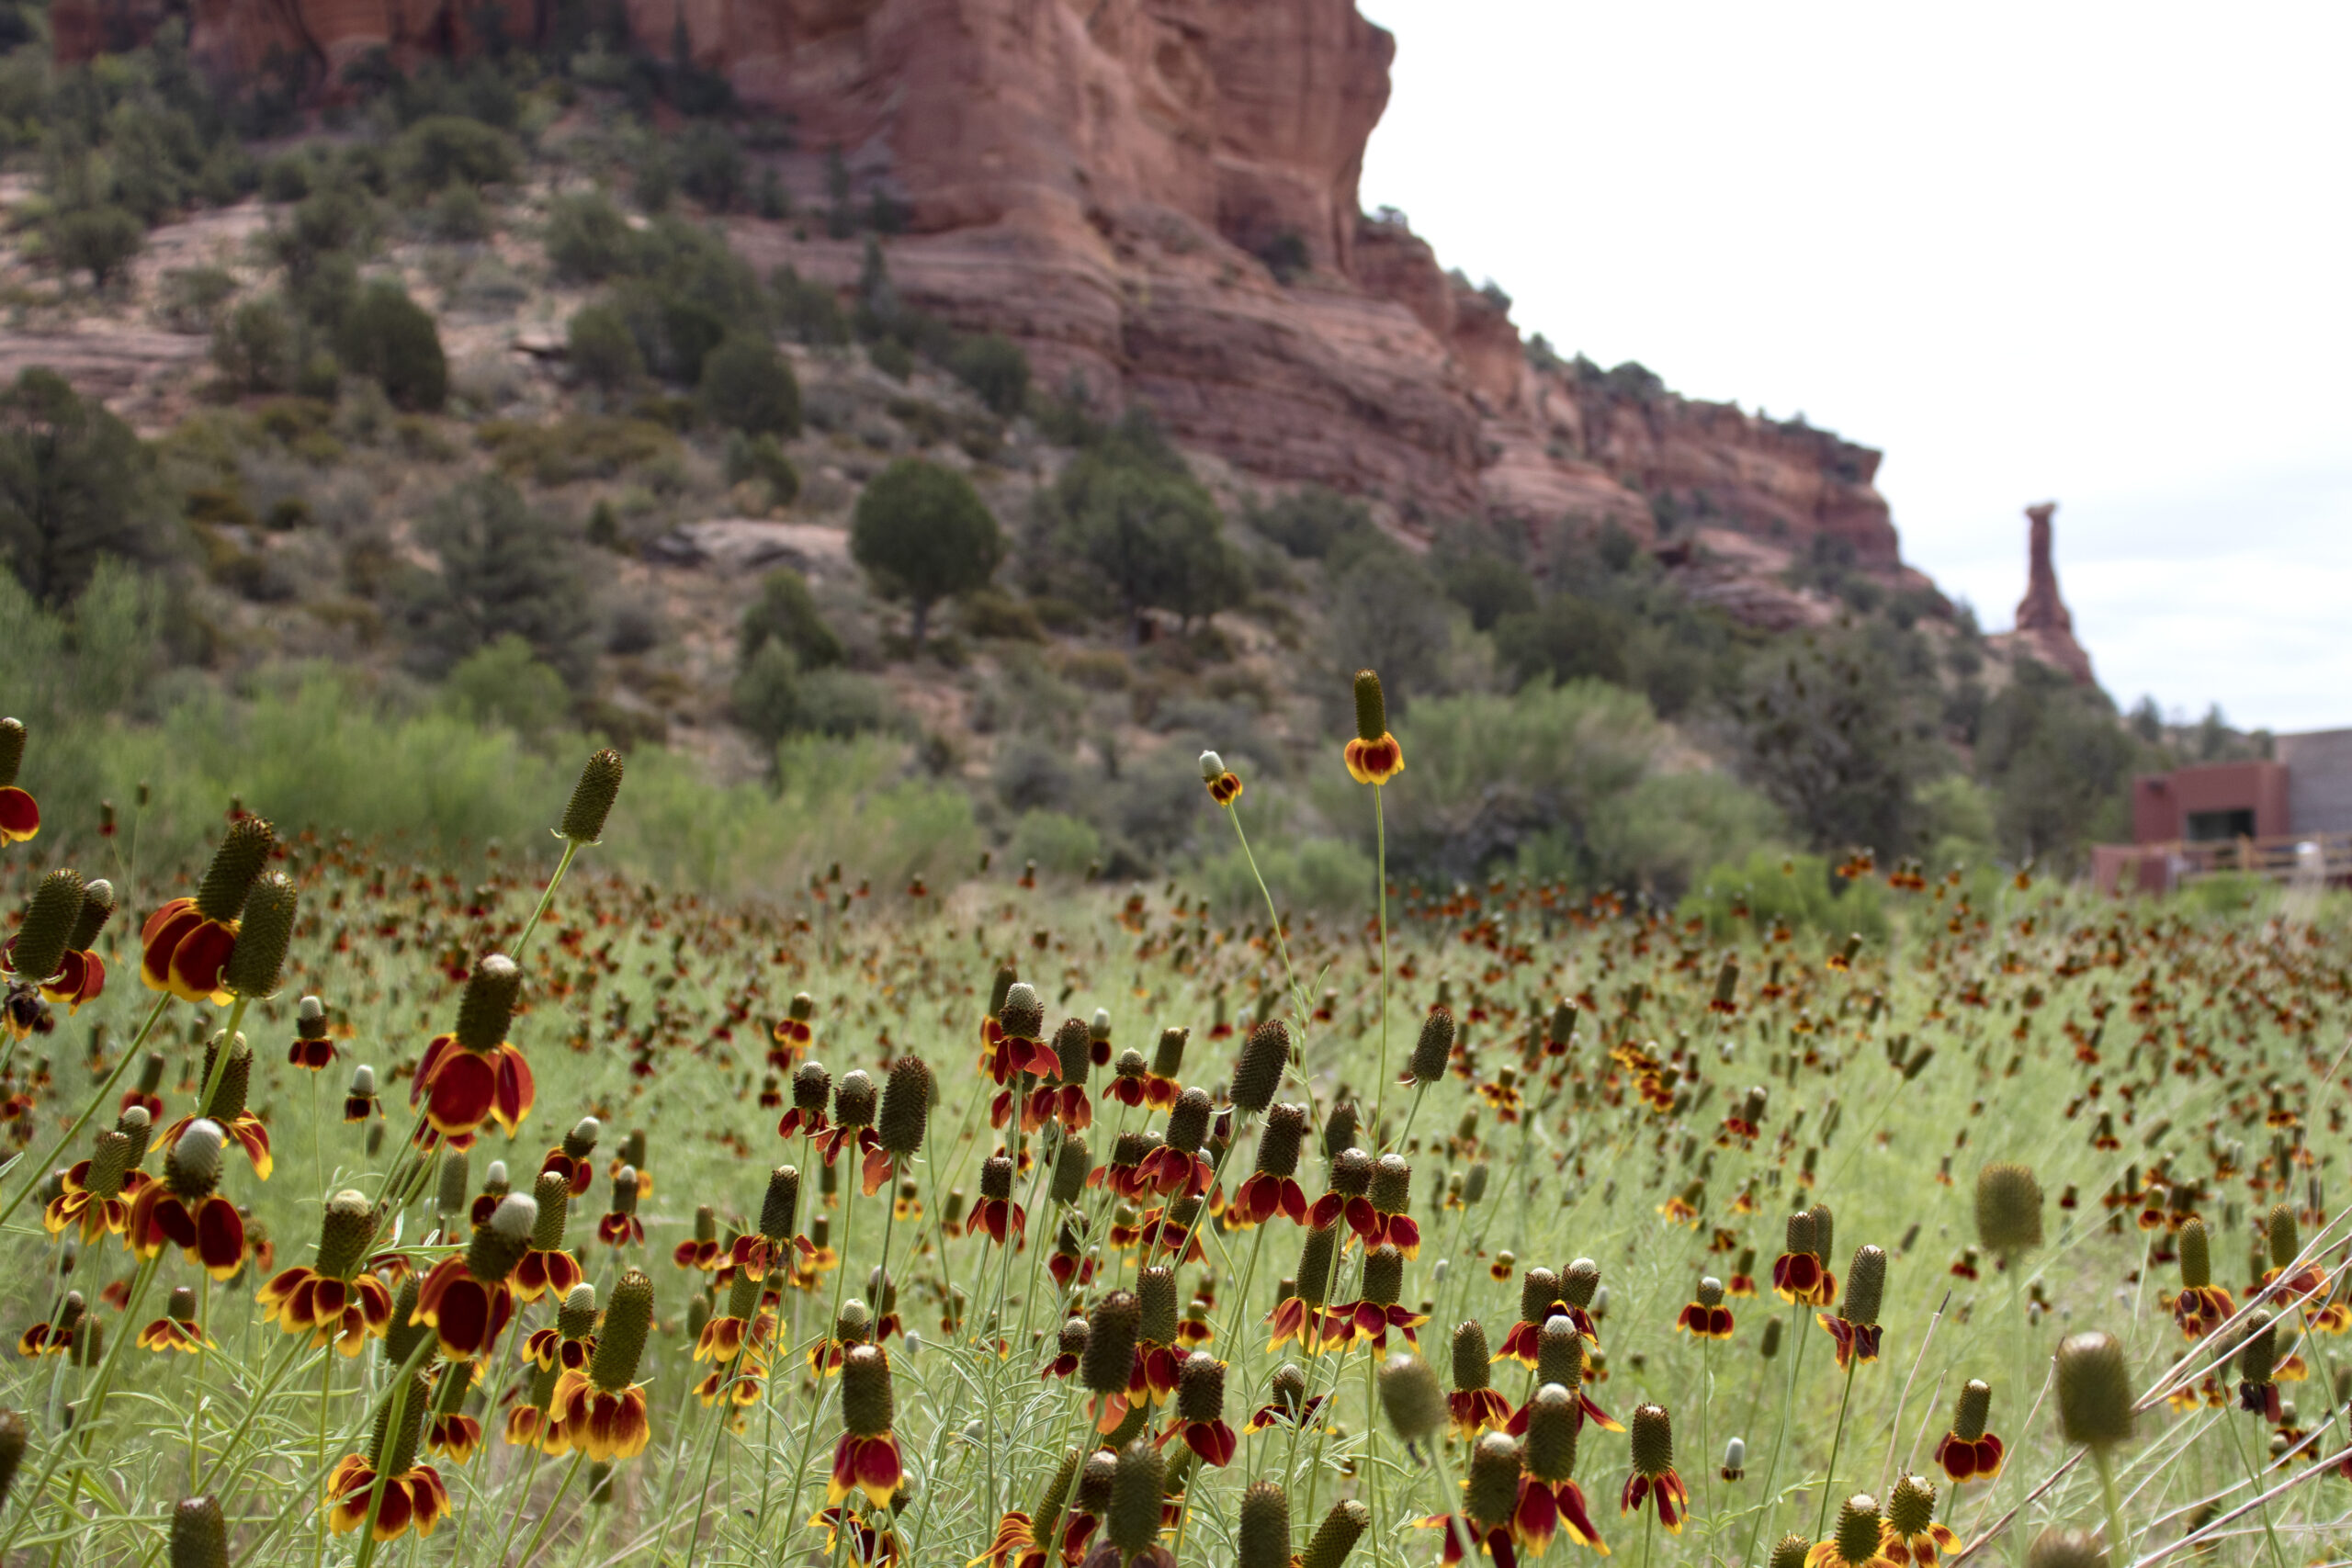 Field of Mexican hat flowers outside our Casitas at Mii amo